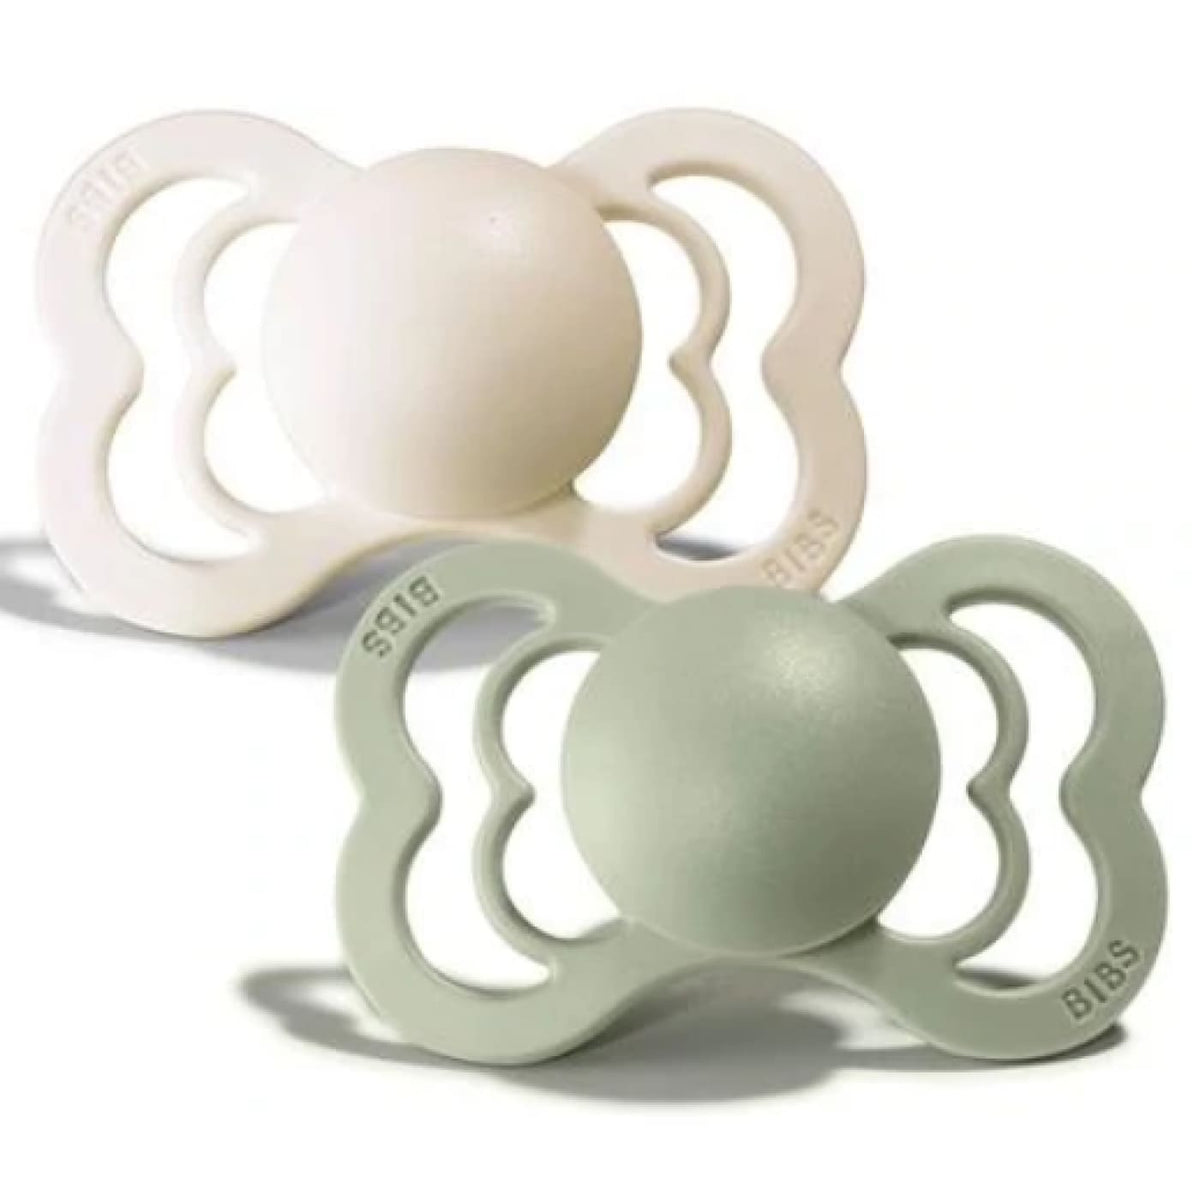 BIBS Dummy Twin Pack Couture Silicone Size One - Ivory/Sage - One / Ivory/Sage - NURSING &amp; FEEDING - DUMMIES/SOOTHERS